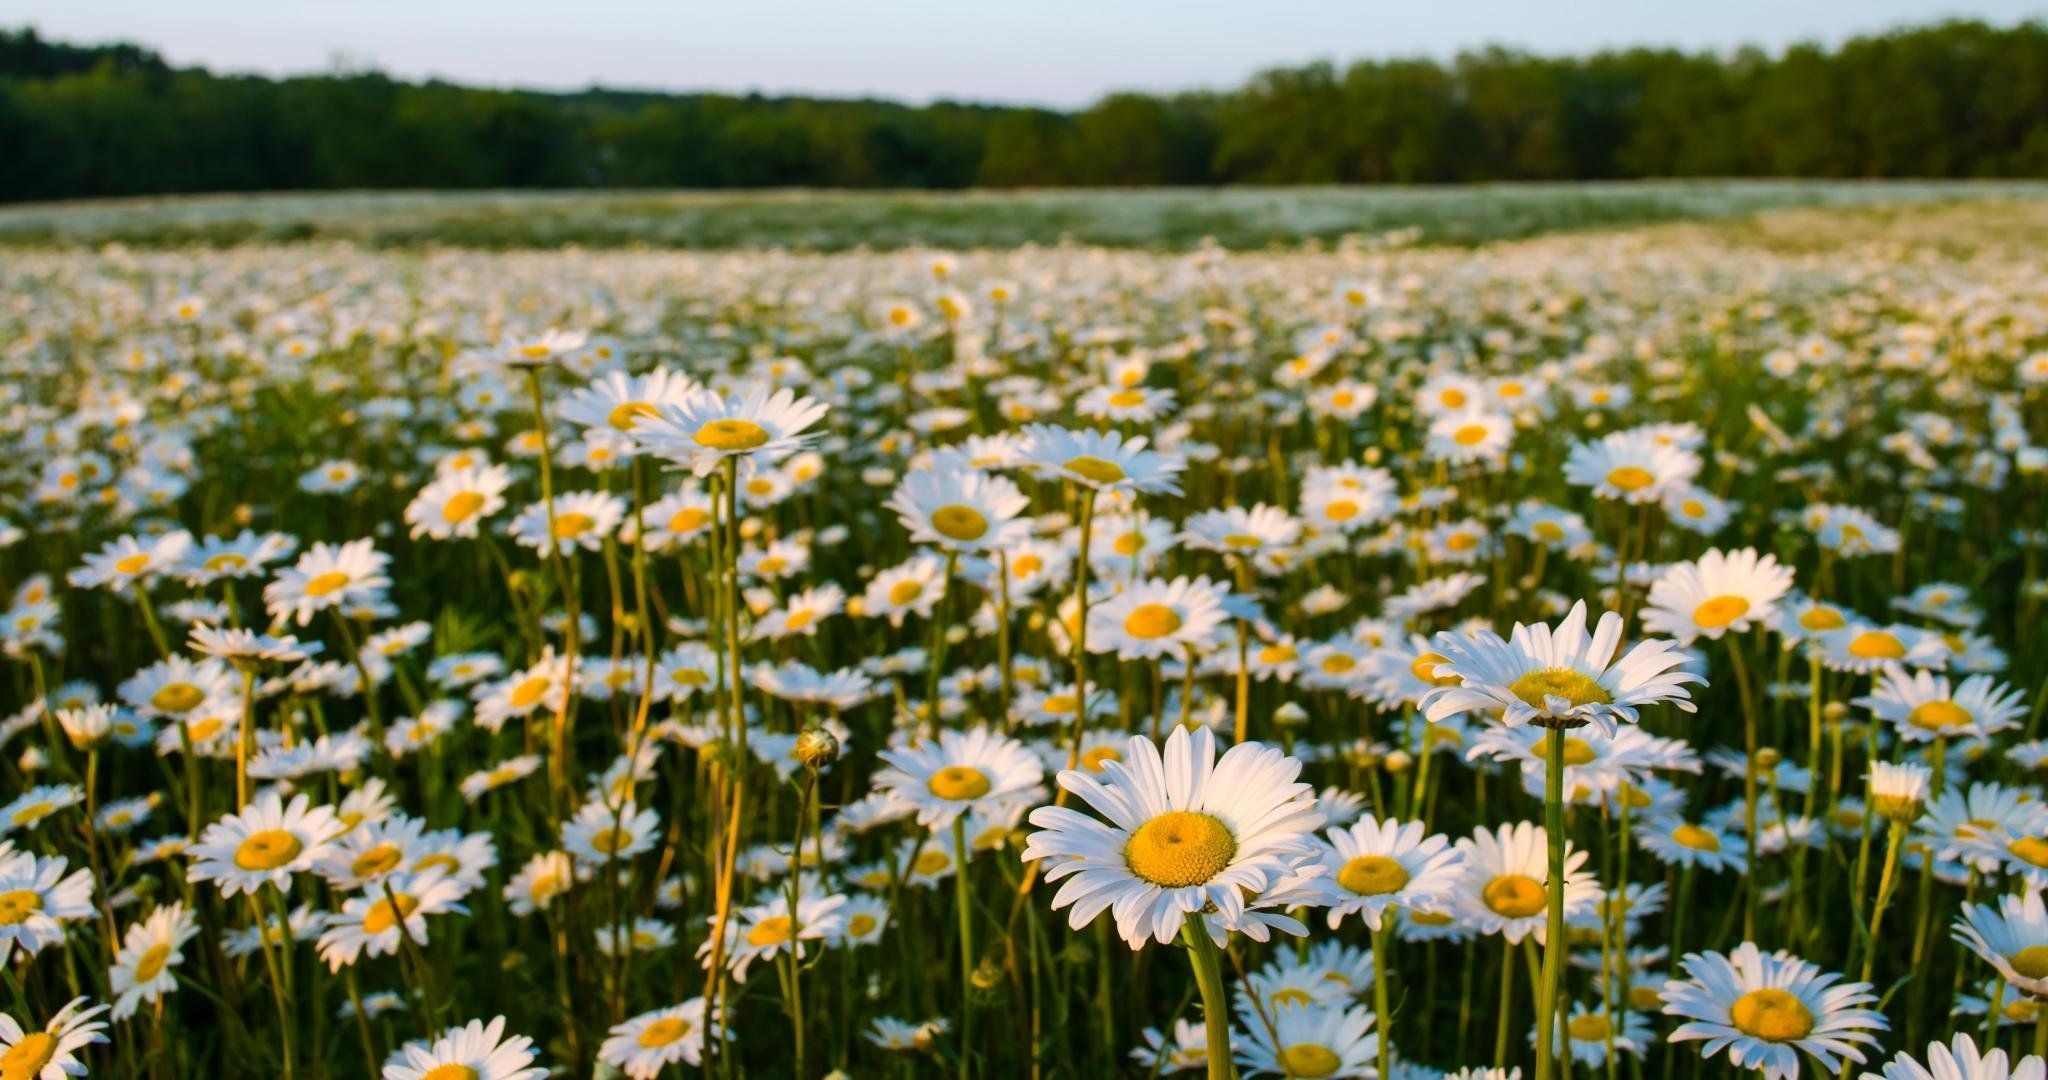 field of daisies background